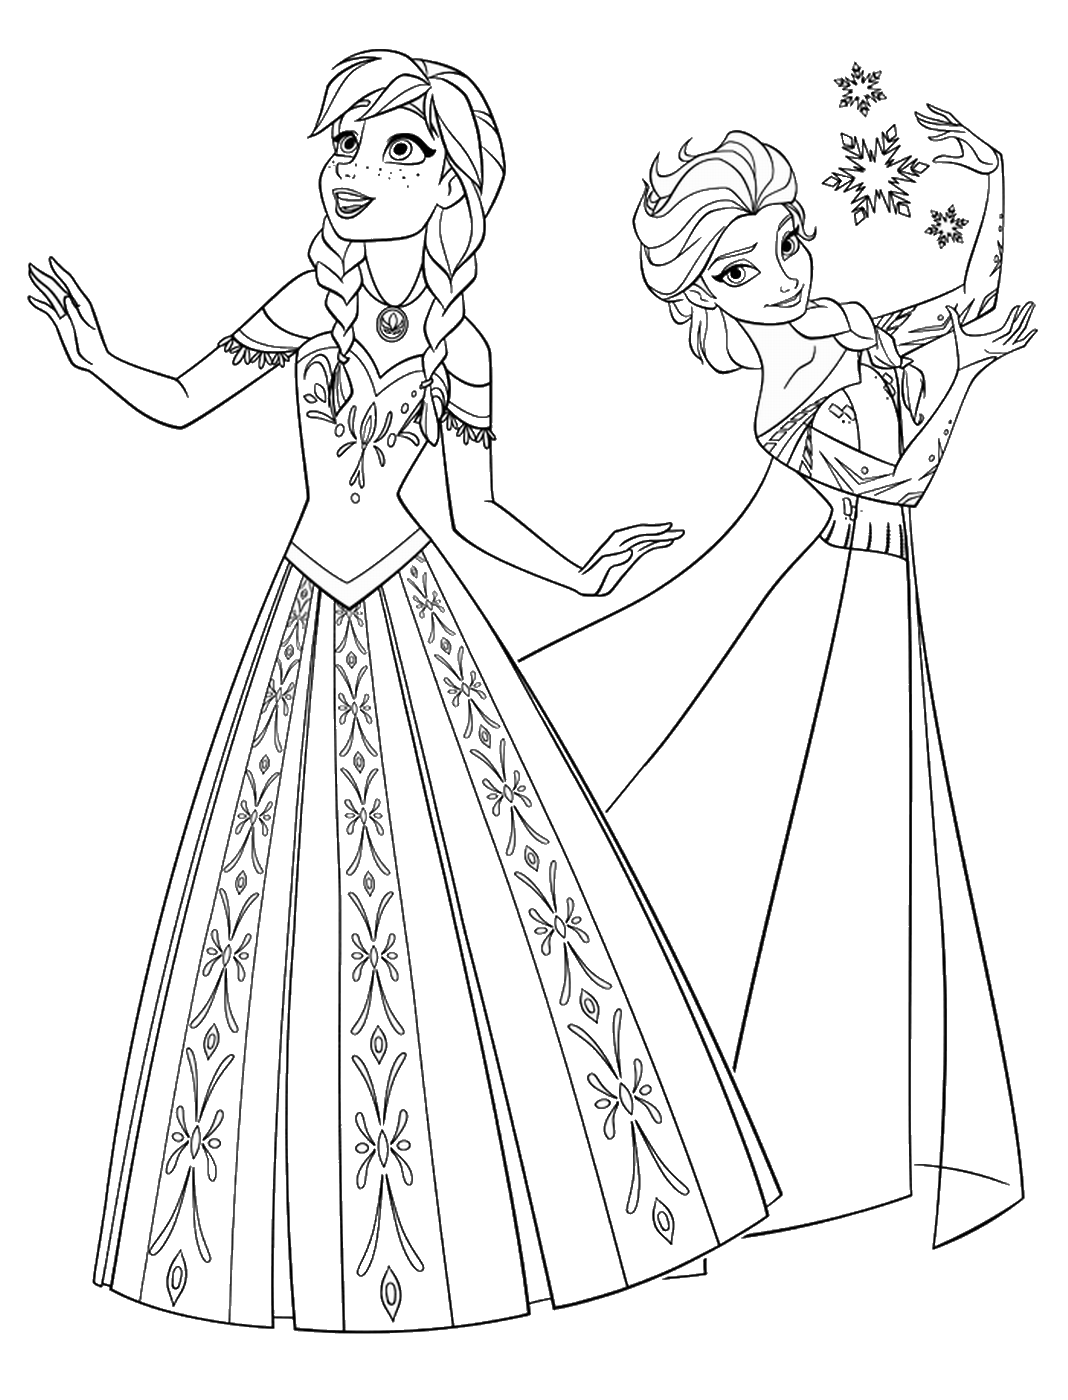 Frozen Coloring Pages TV Film frozen_coloring_21 Printable 2020 03138 Coloring4free